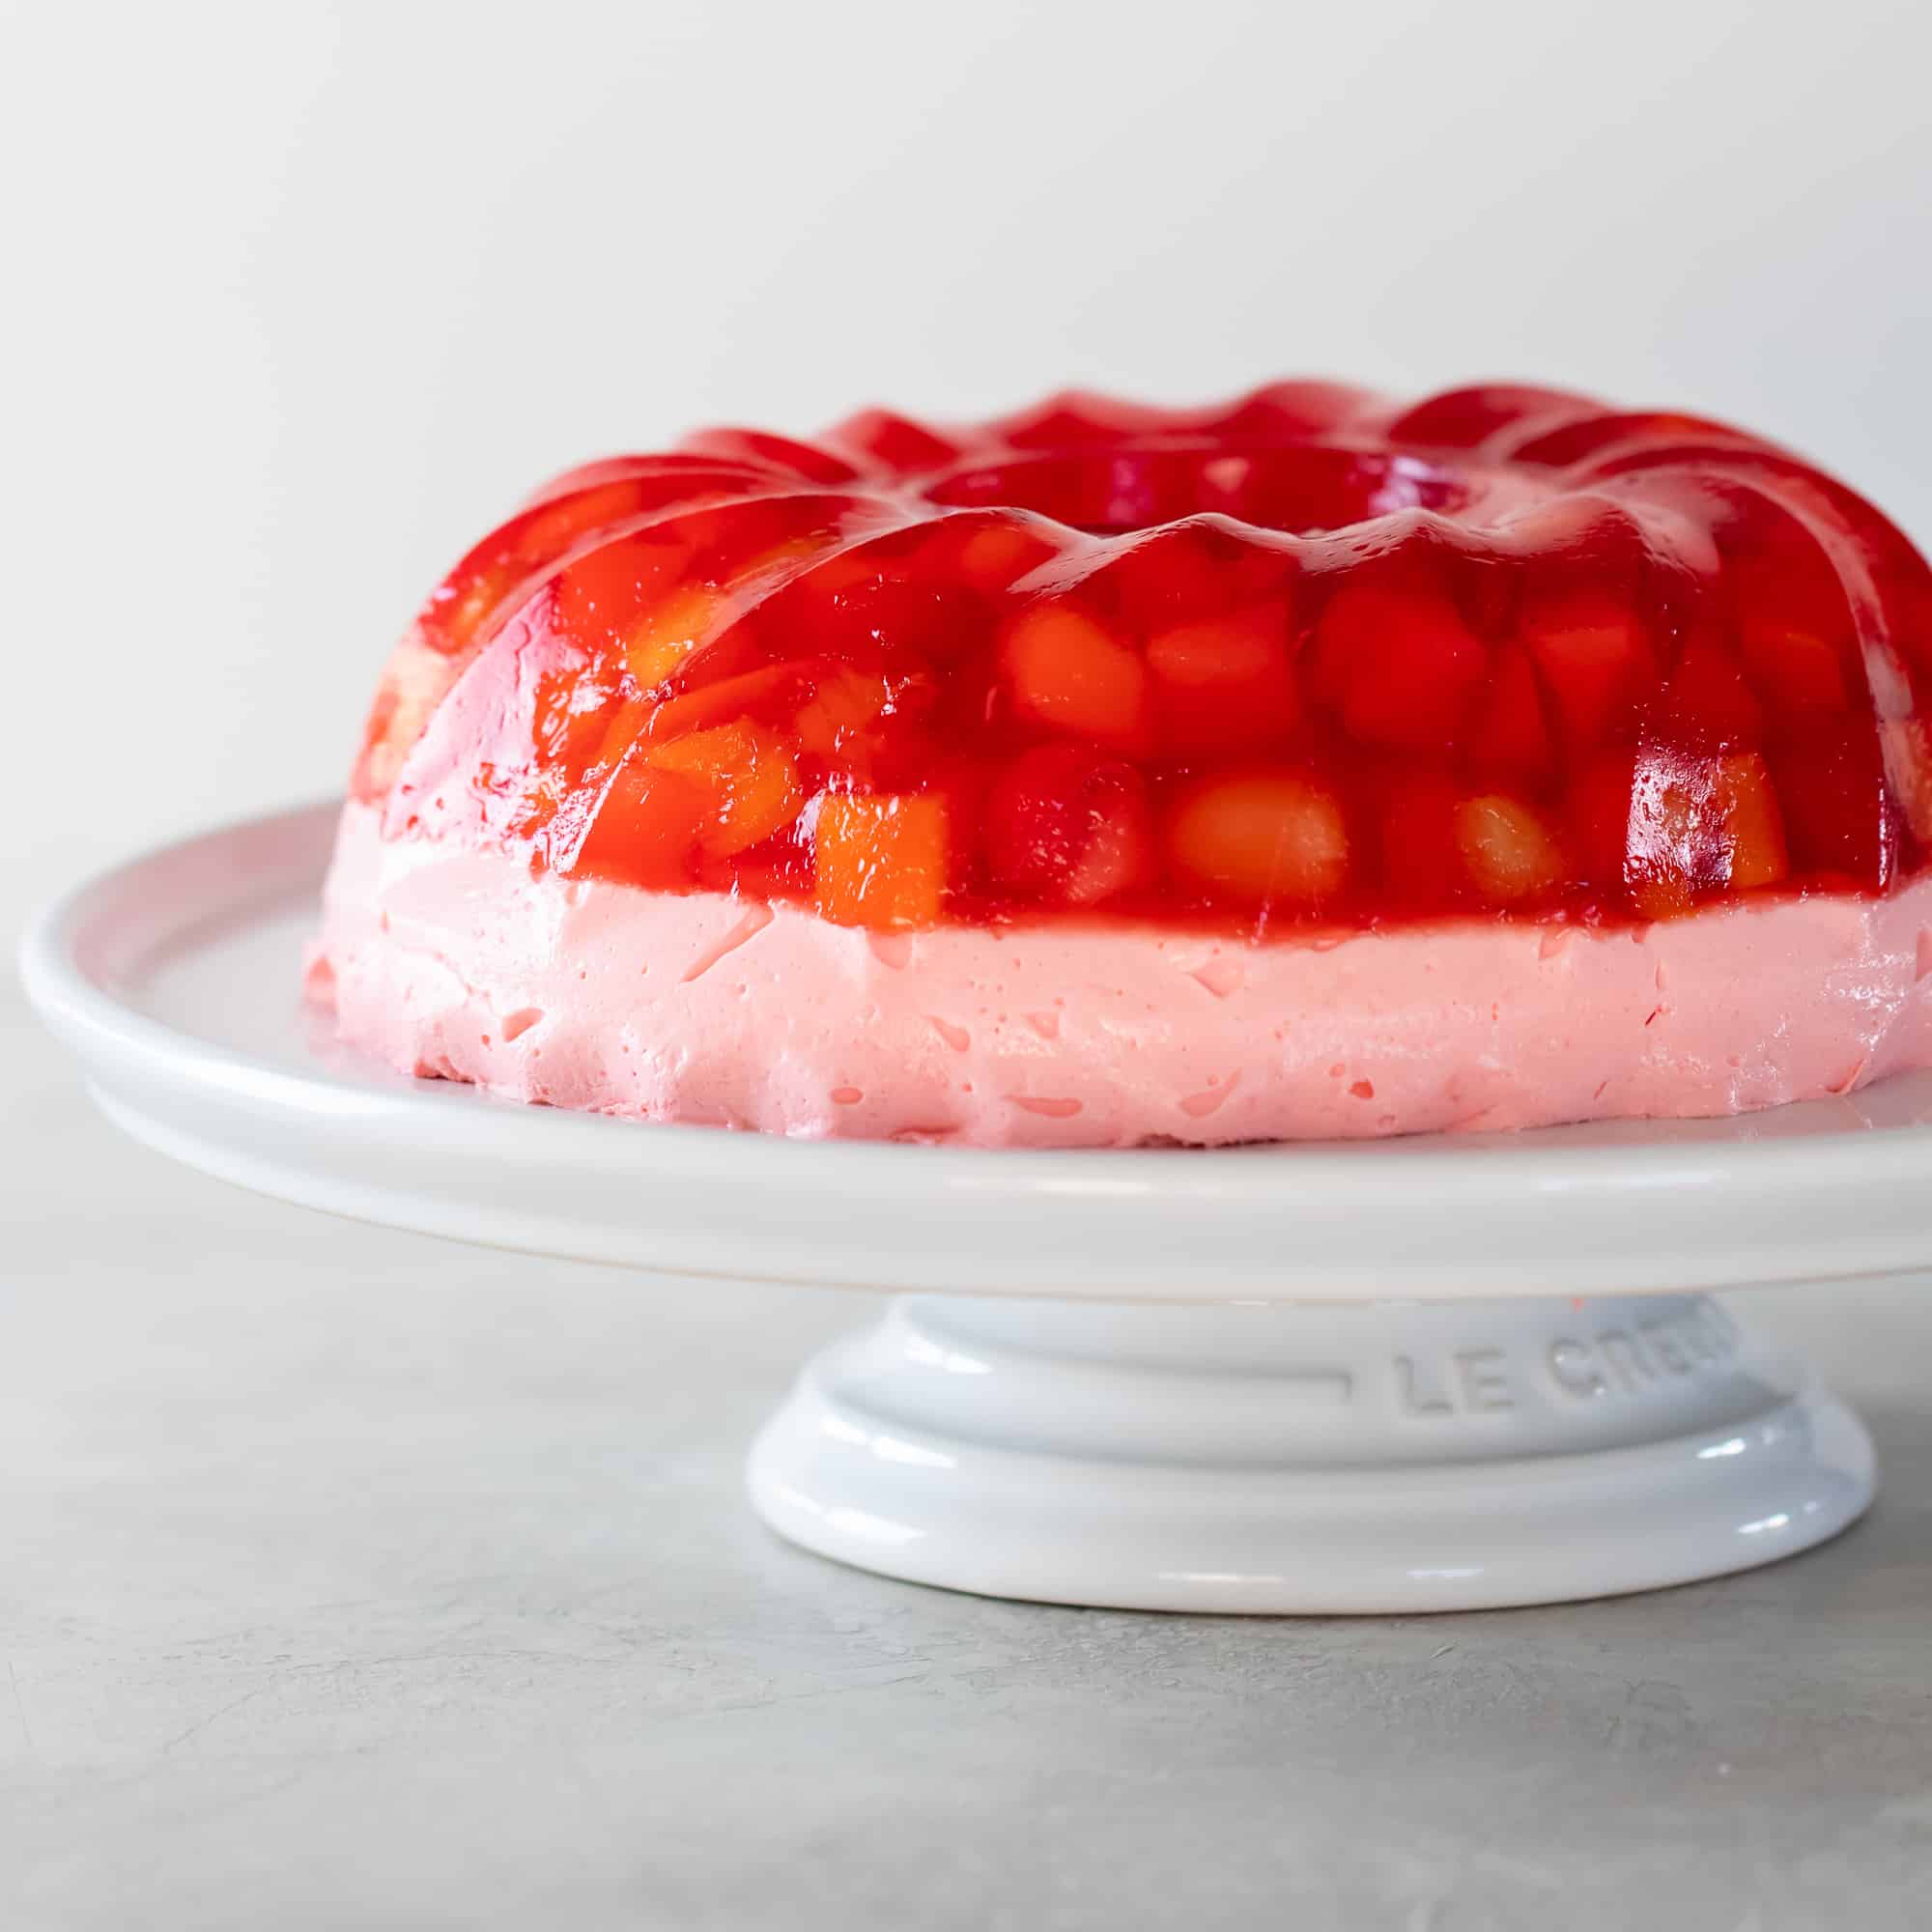 How To Make a Layered Jello Mold